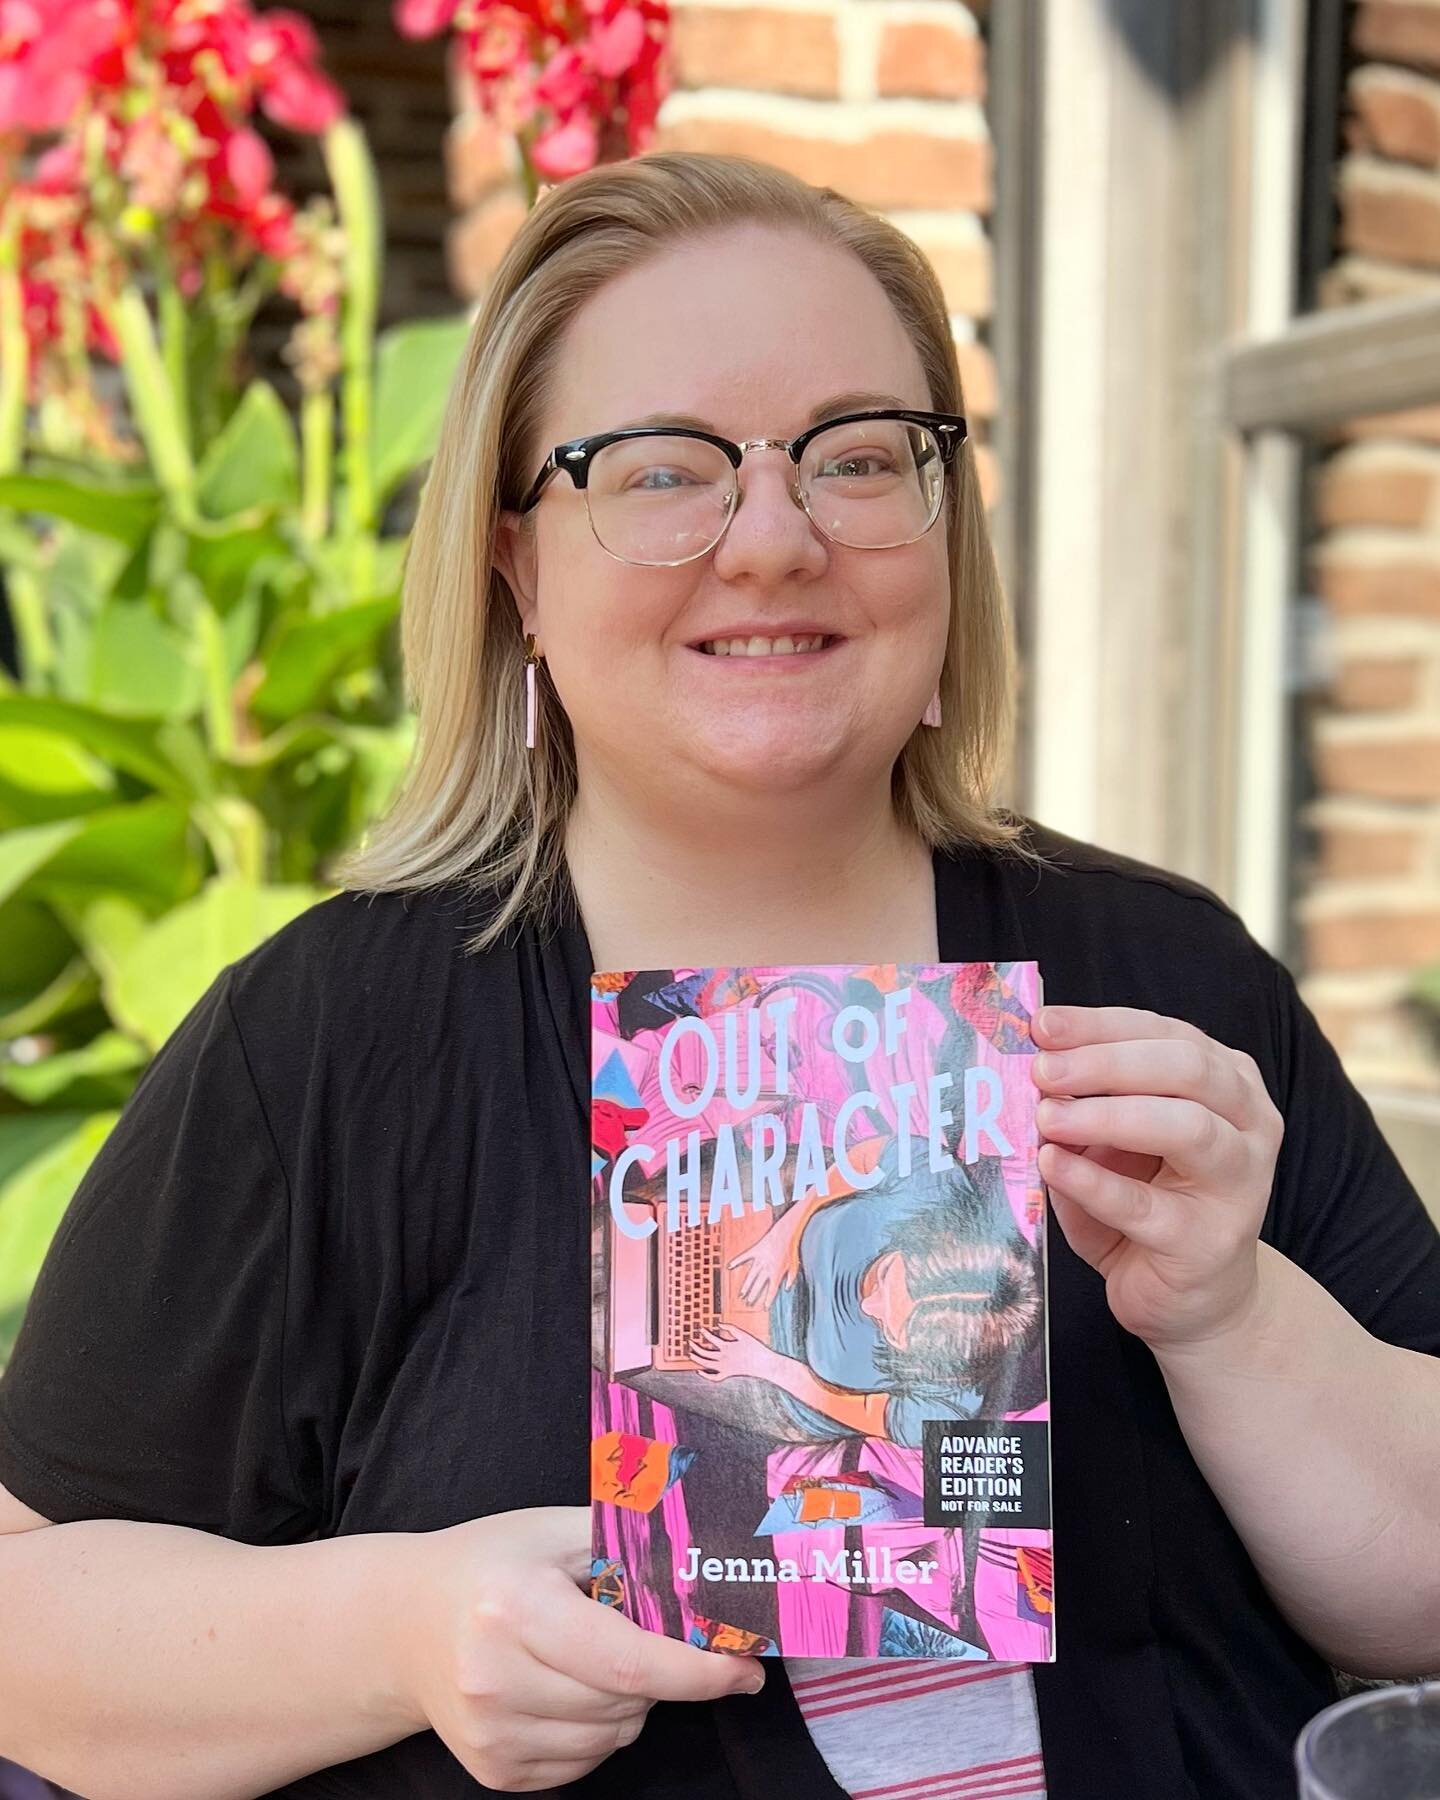 Happy 2023 Debut Author Chat month! I&rsquo;m Jenna. I write Young Adult contemporary stories about fat, queer, nerdy girls who deserve to be seen and have their voices heard. When I&rsquo;m not writing or reading, I enjoy cross stitching, traveling,